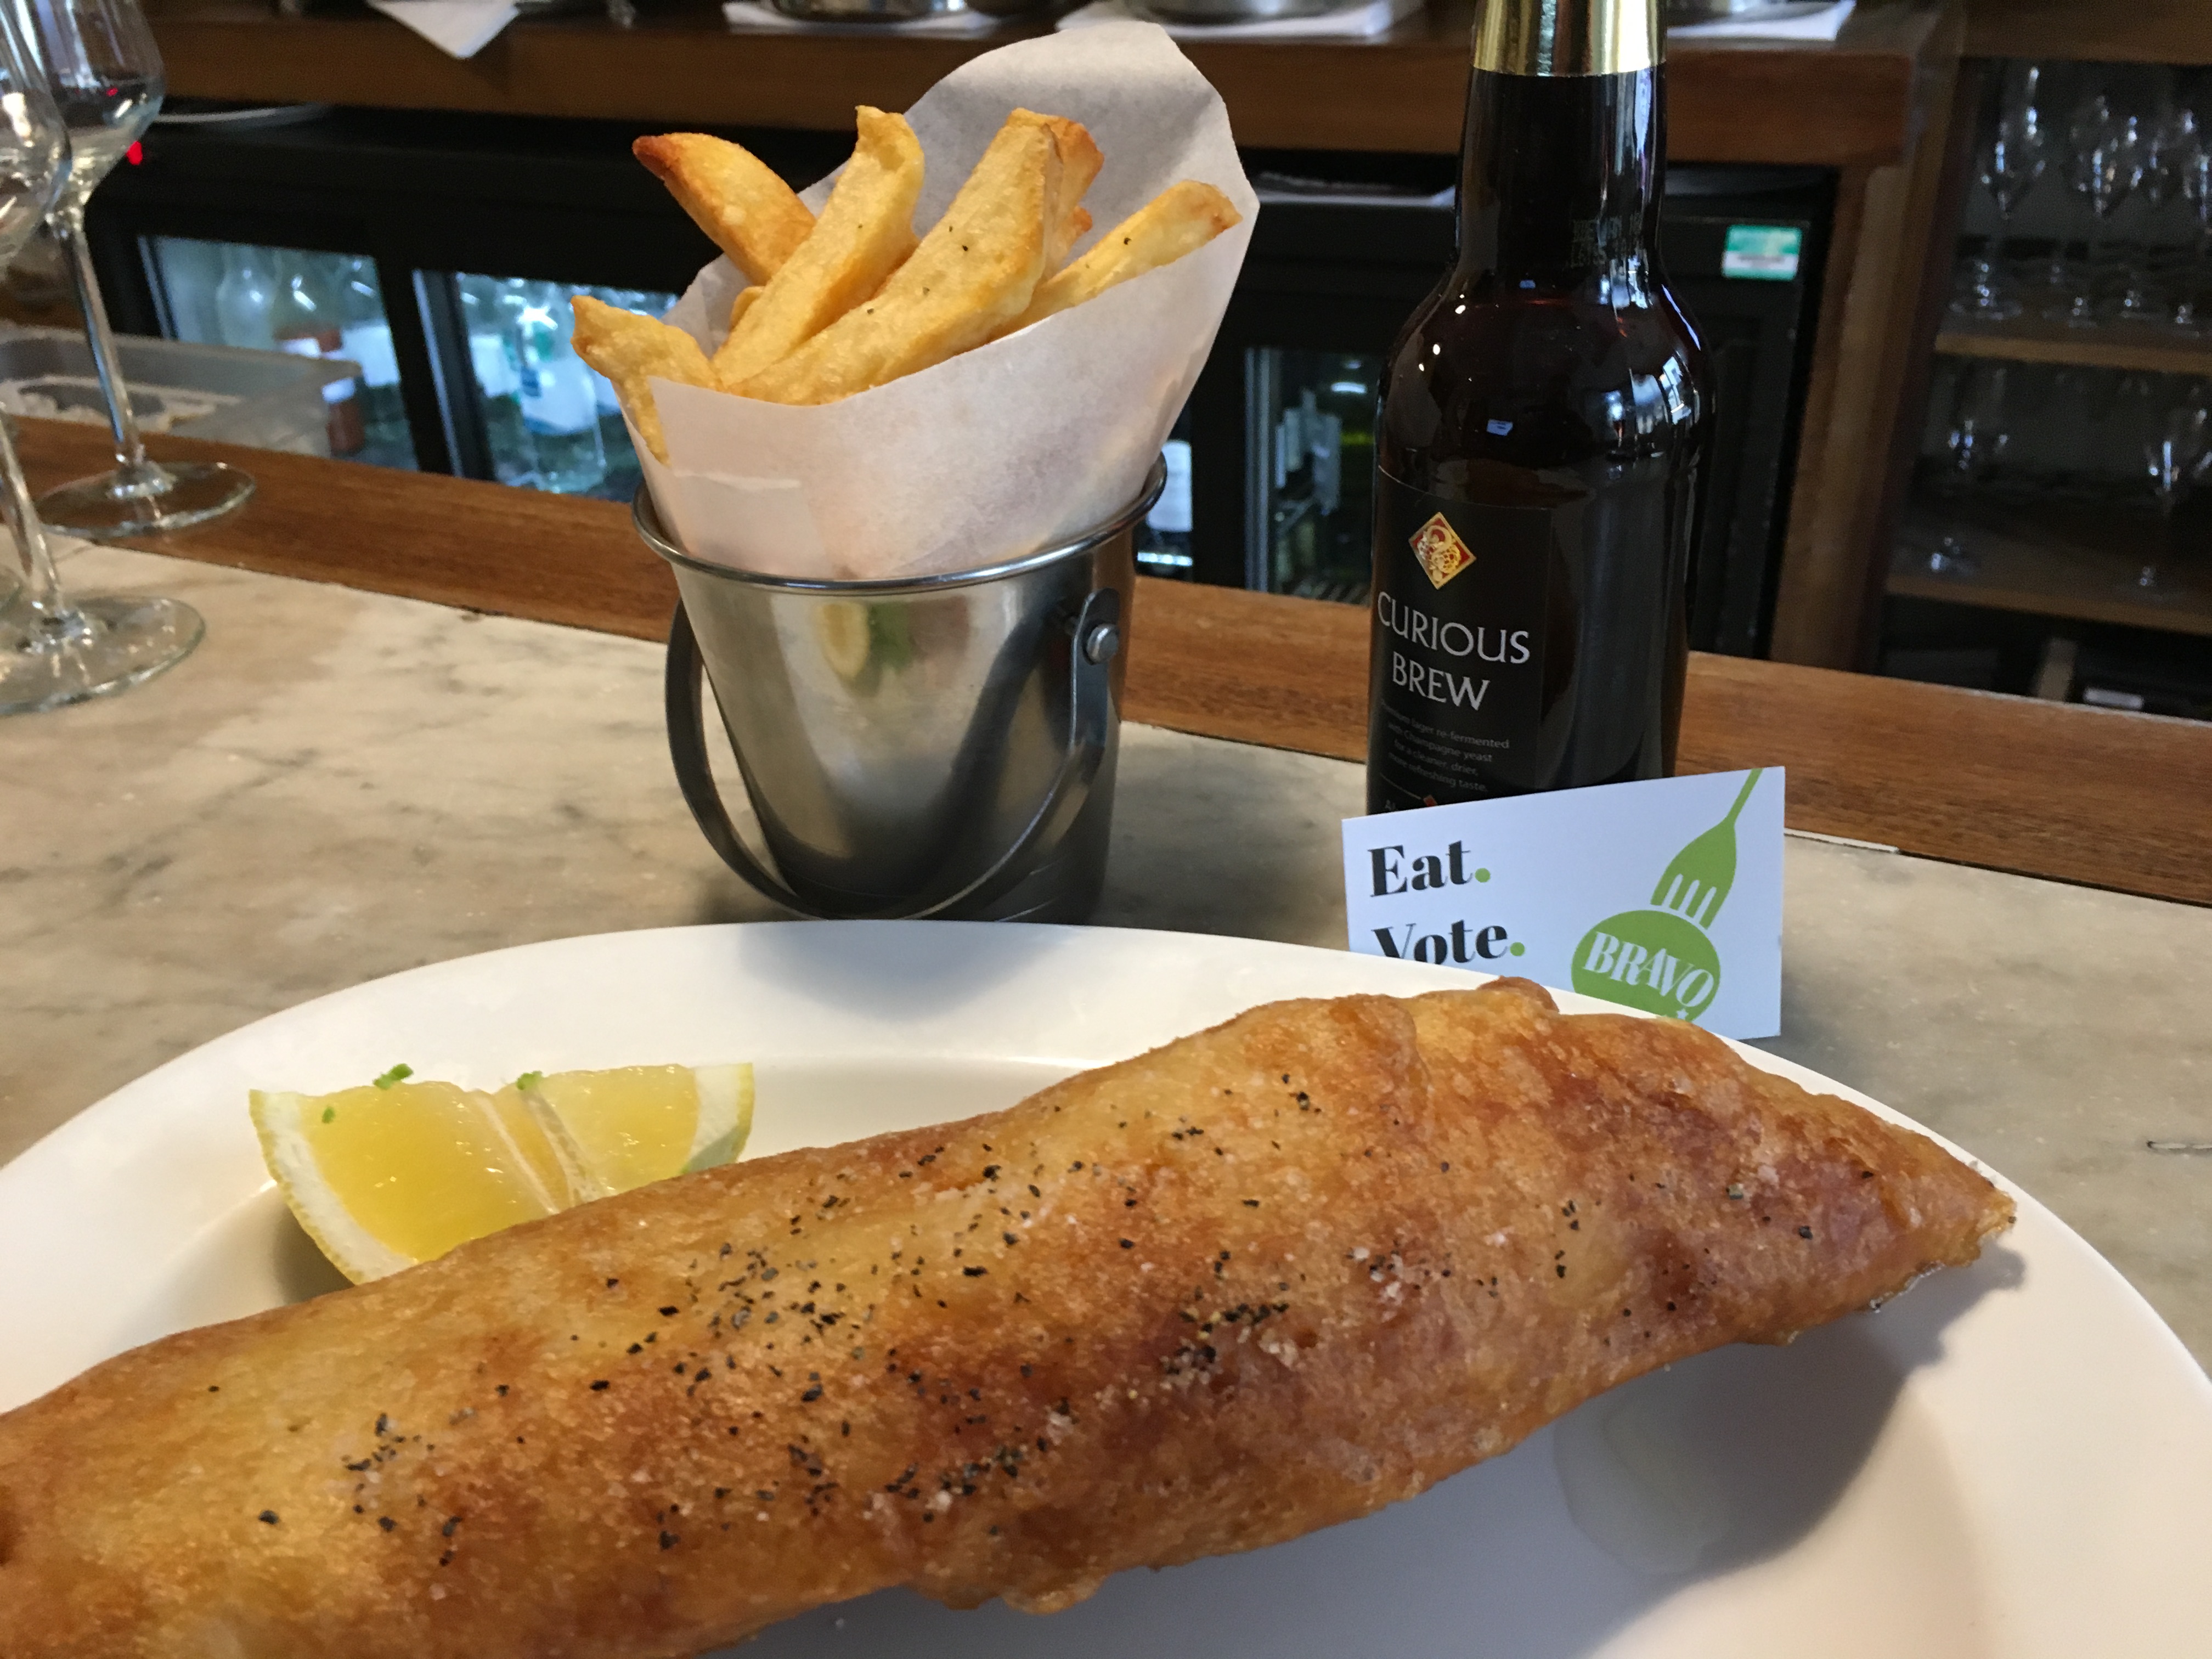 Vote for English's of Brighton in the BRAVO Awards. Plate of fish and chips with BRAVO card